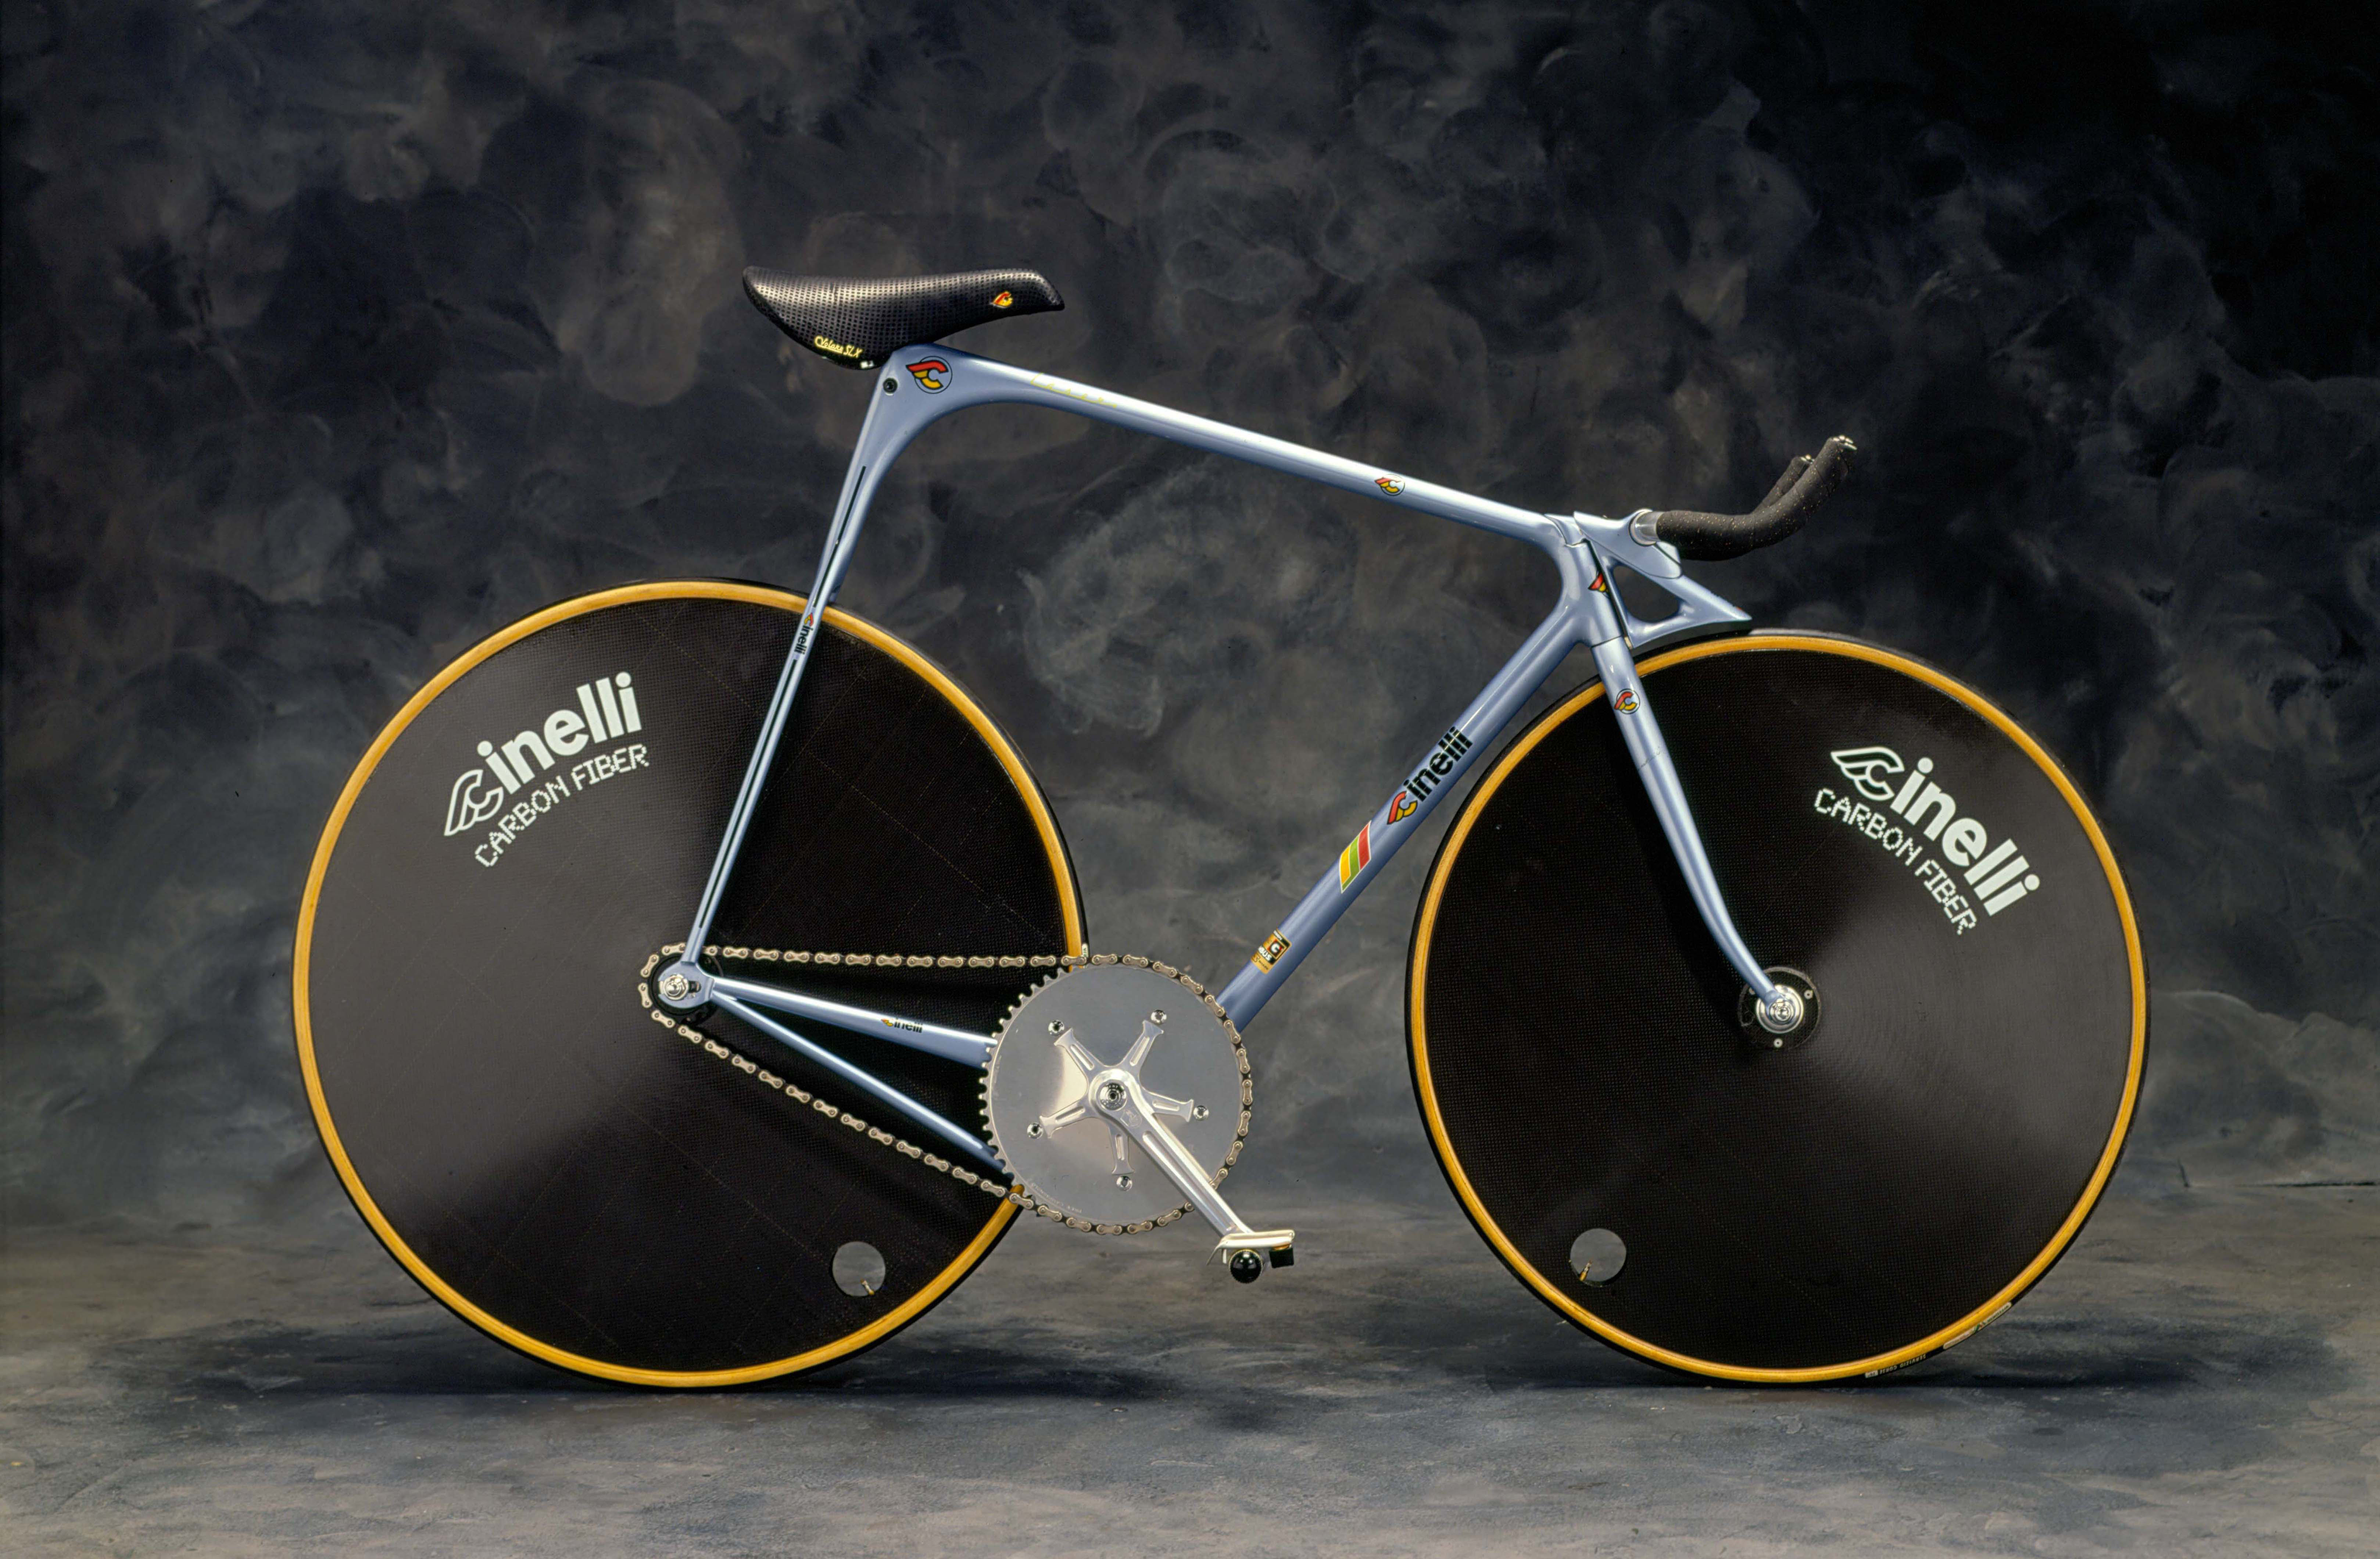 Cinelli The Art And Design Of Bicycle We Love Cycling Magazine